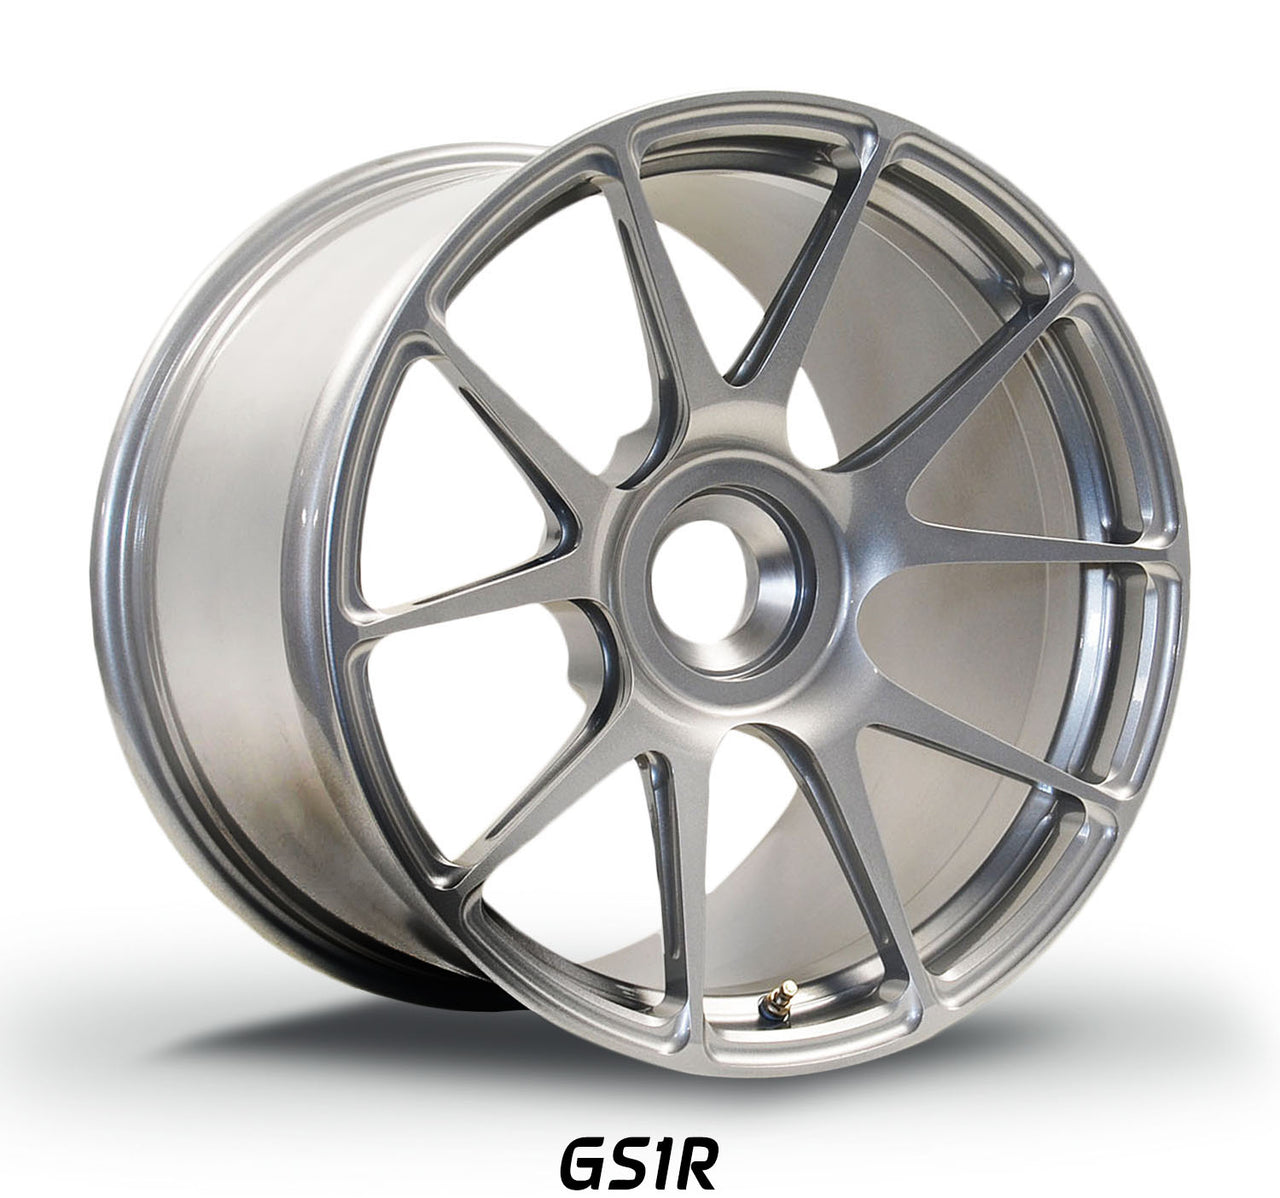 Forgeline GS1R for Porsche 992 GT3 forged 6061-T6 wheels the strongest racing wheels for Porsche center lock